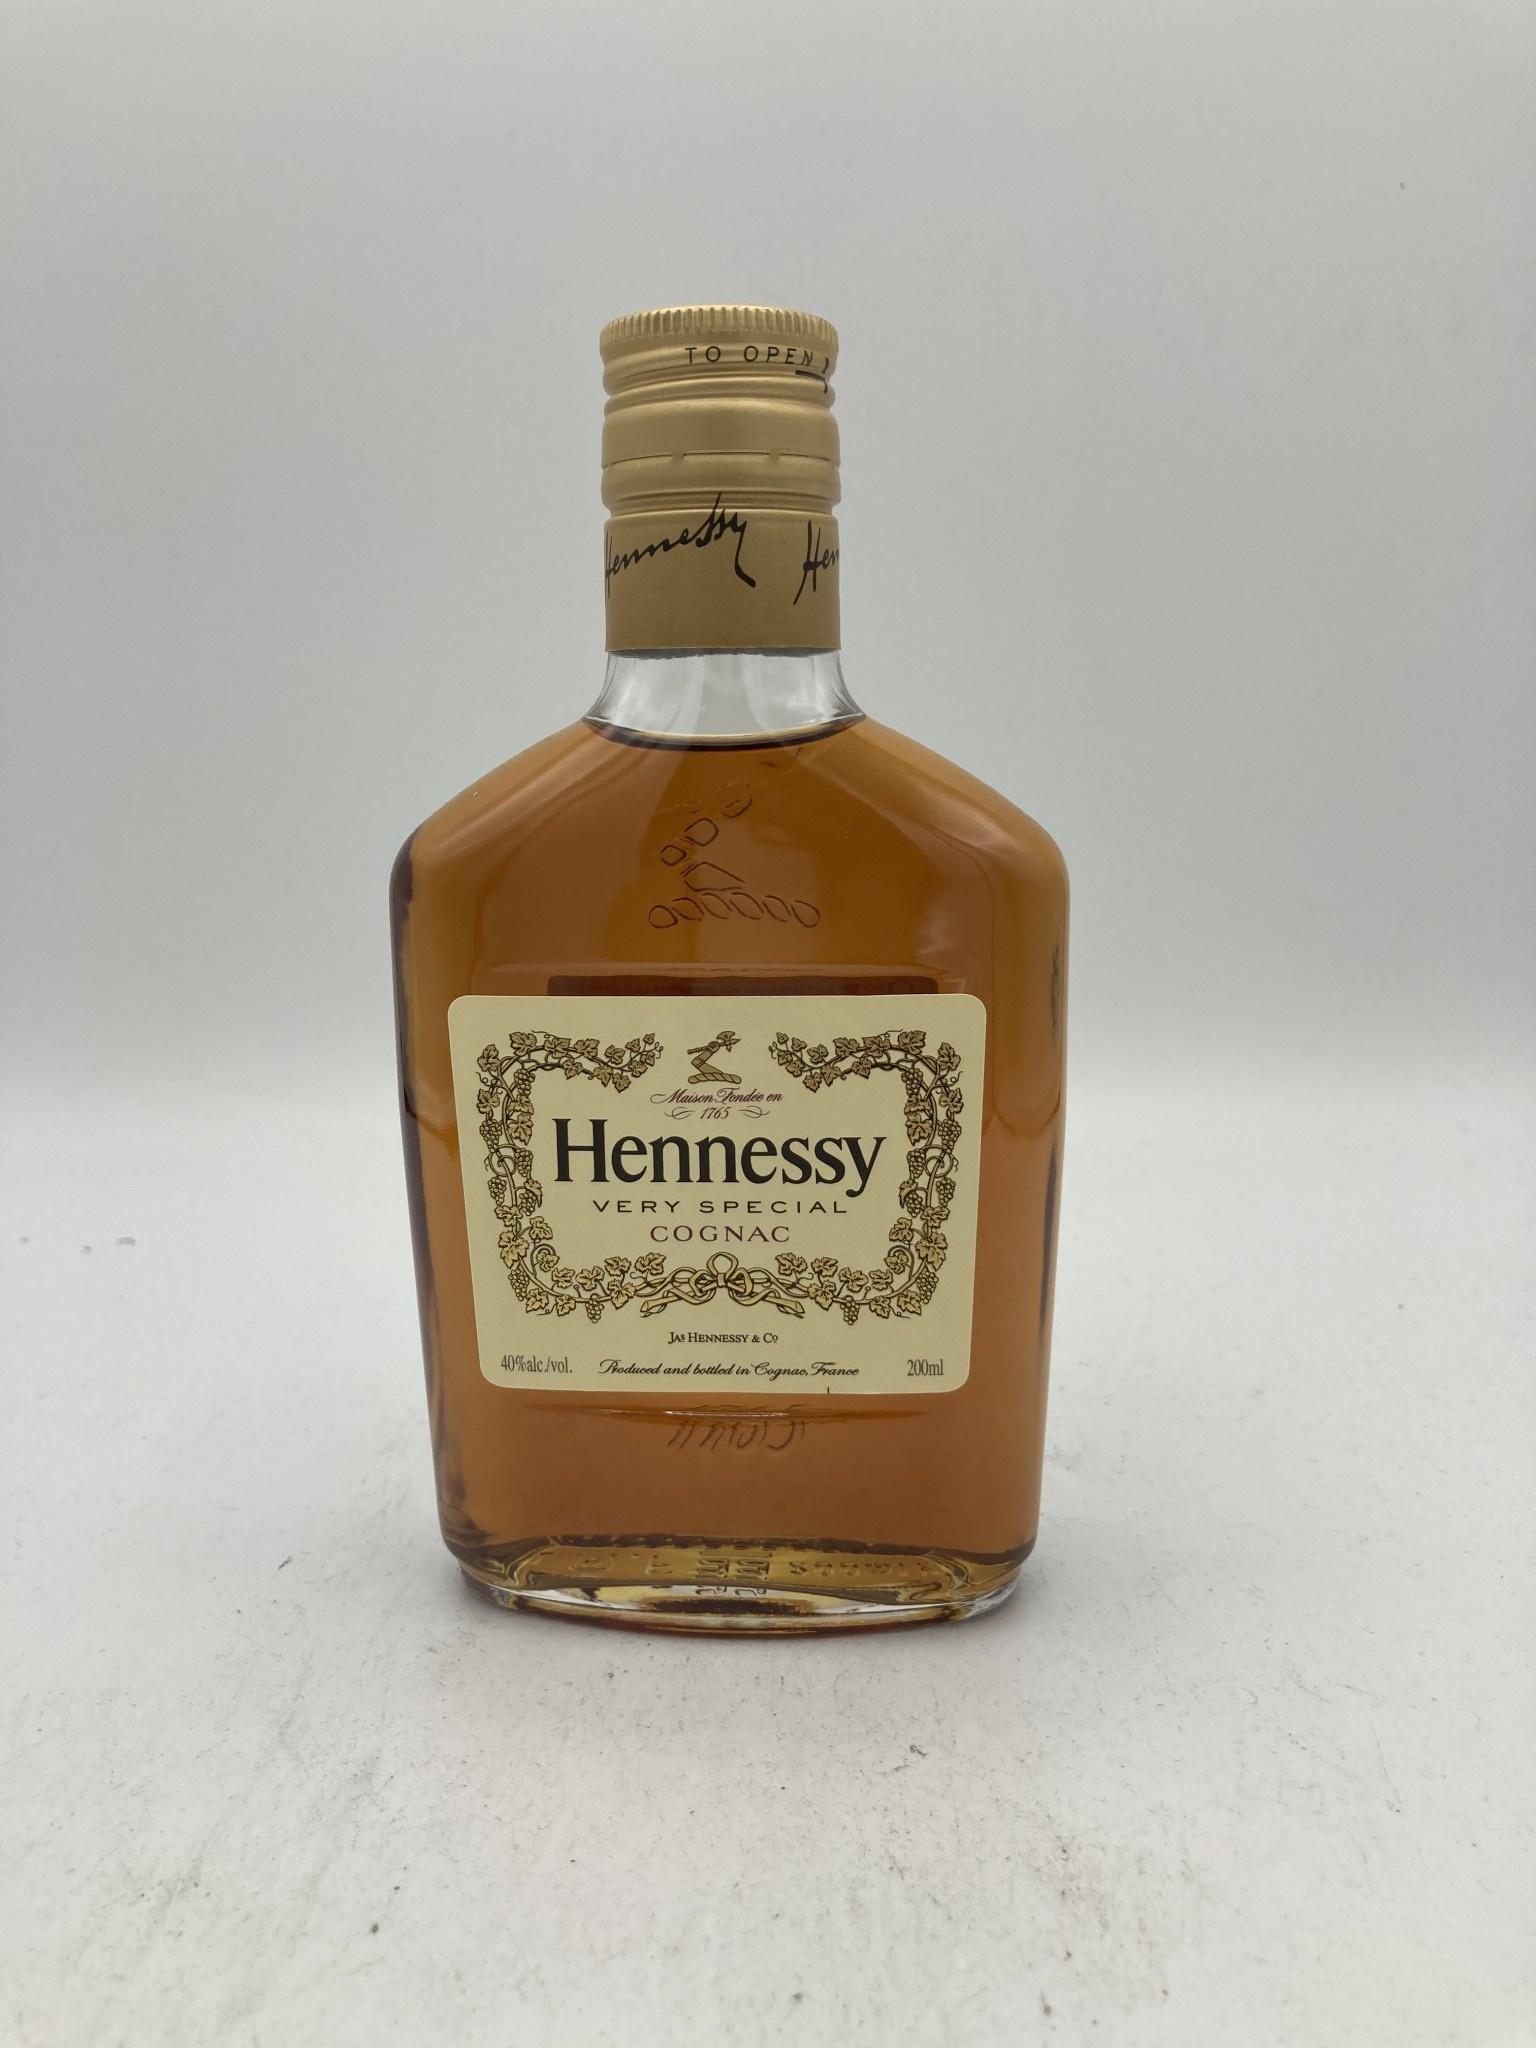 Hennessy cognac very 80 special 200ml proof - abv liquor Main Holly 40